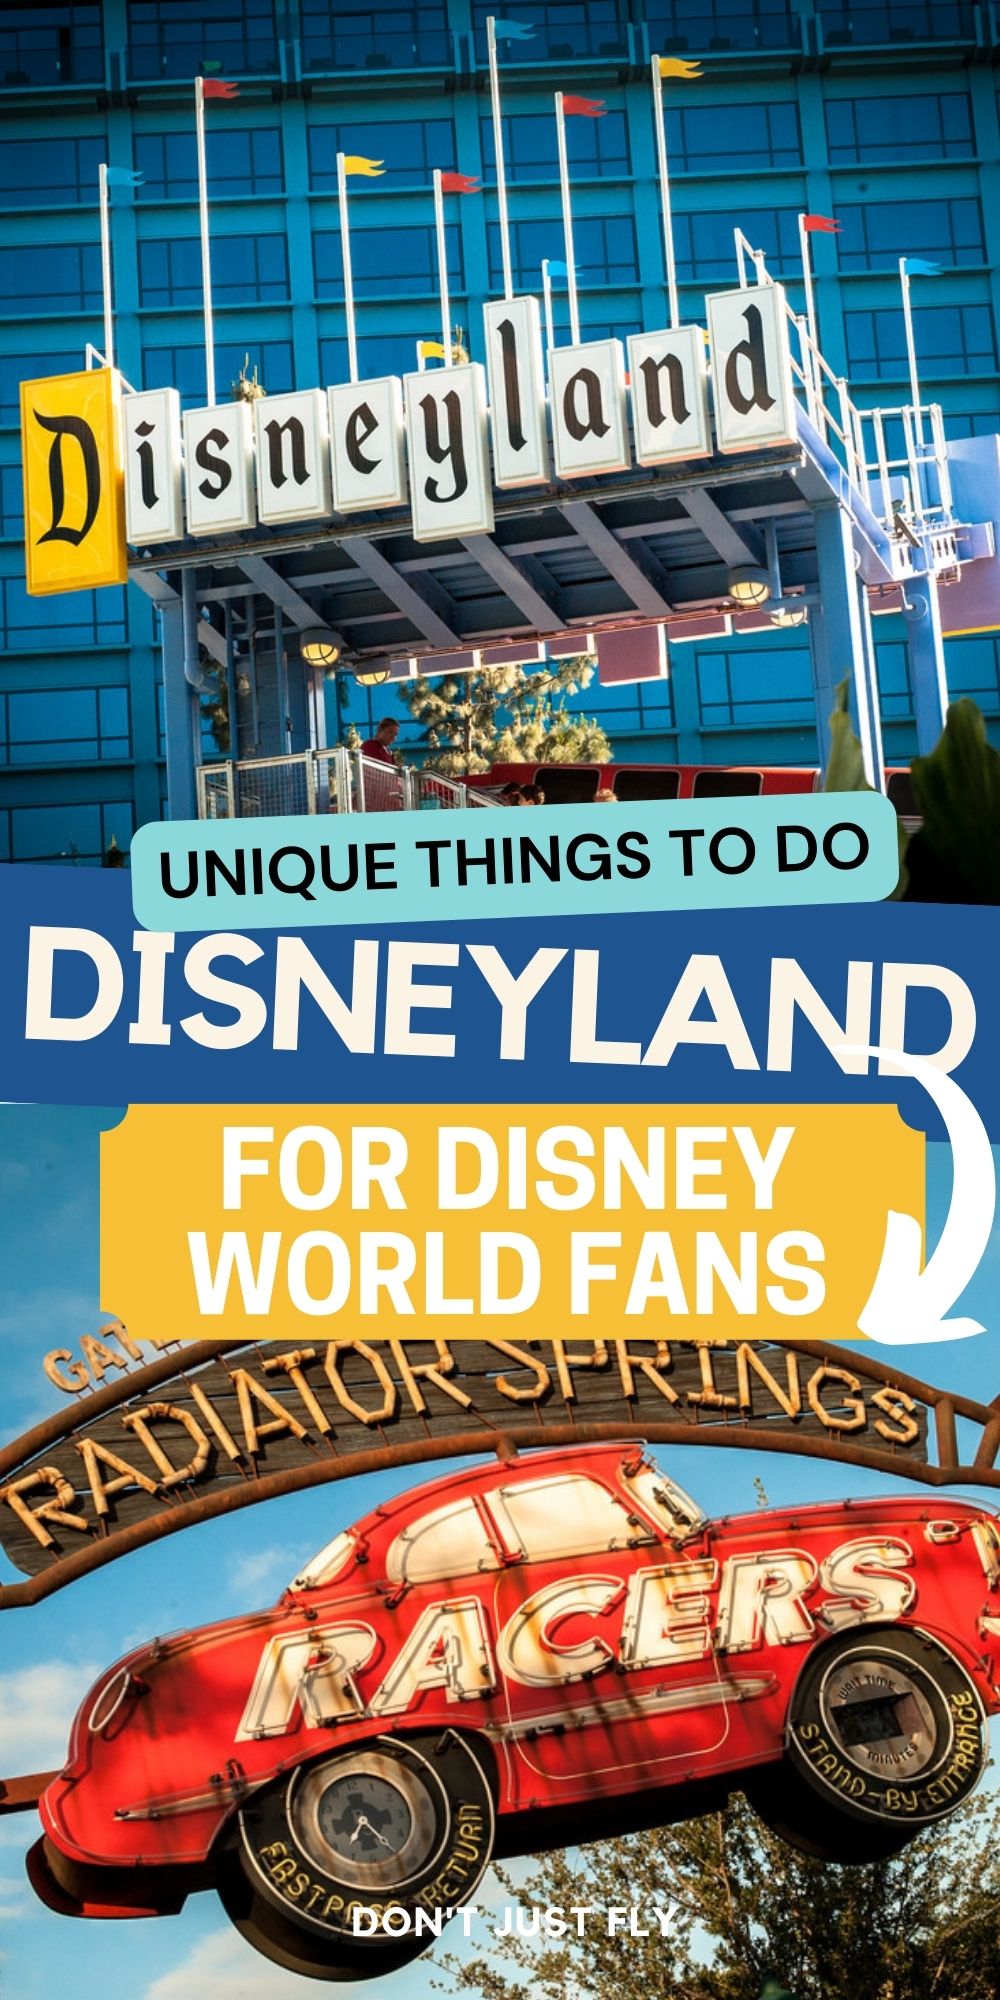 A photo collage shows the classic Disneyland sign next to the sign for the Radiator Springs Racers.